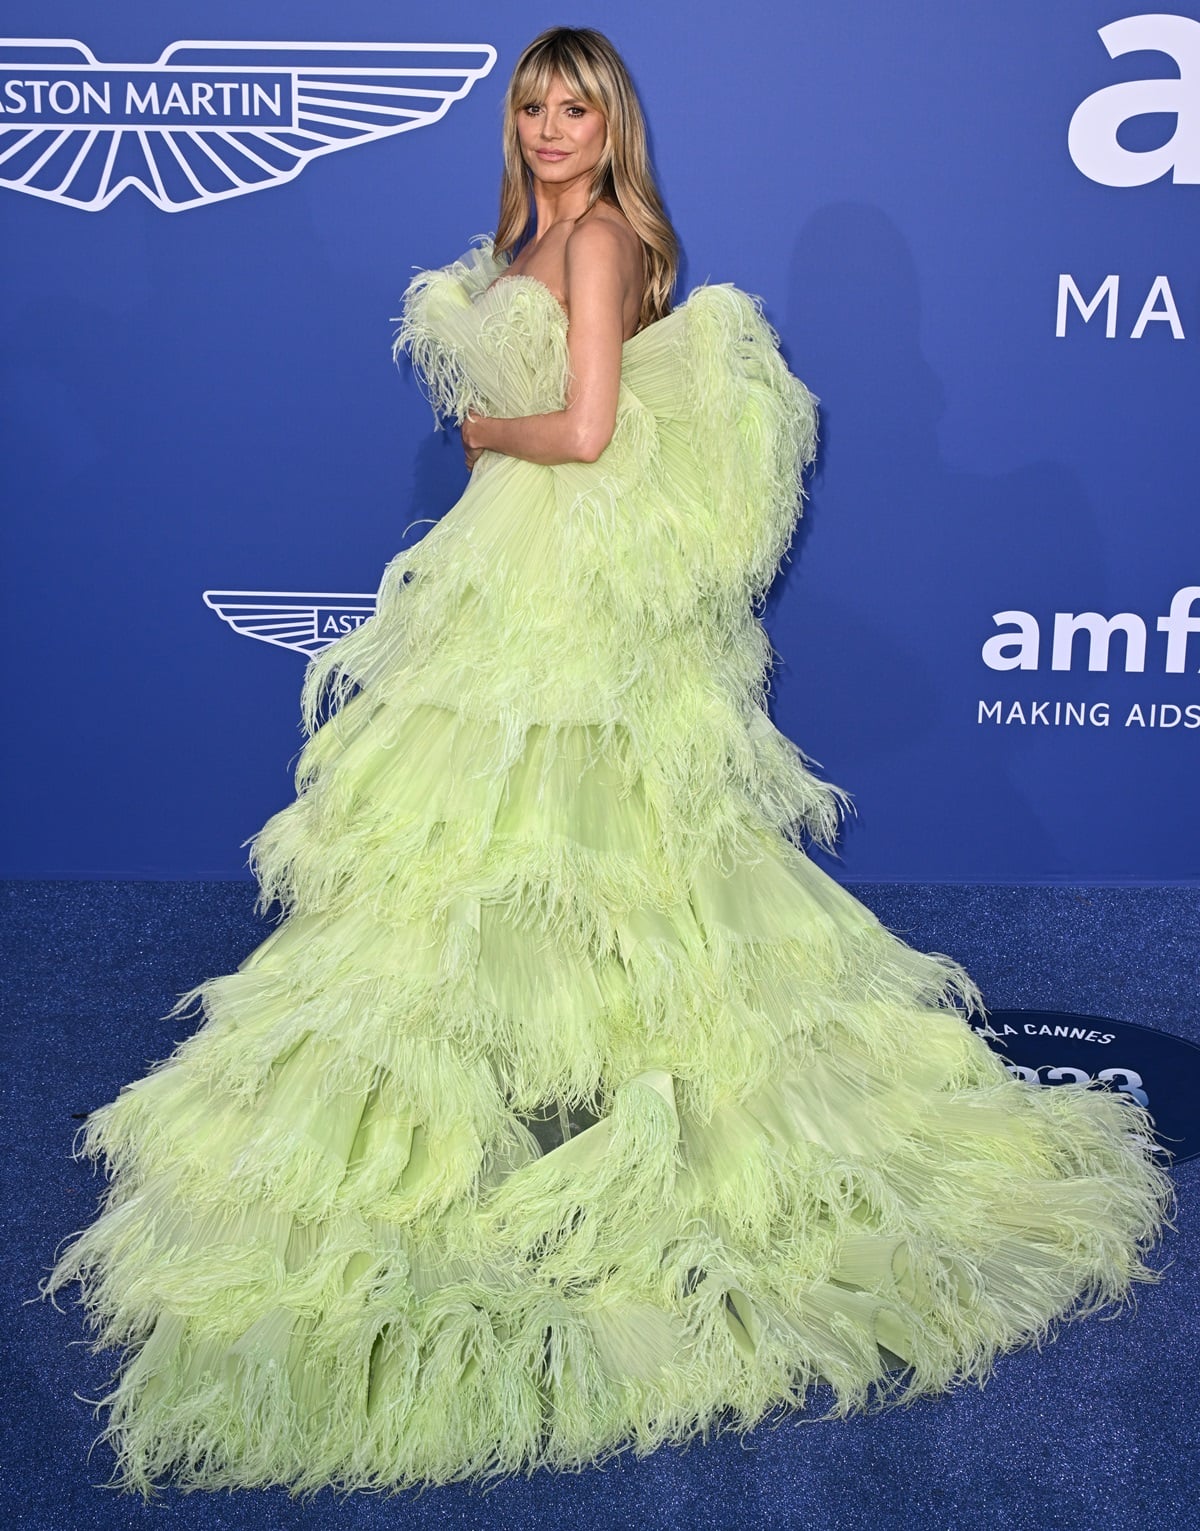 Heidi Klum turned heads in a vibrant green mini dress from the Georges Hobeika SS23 Couture collection boasting a striking train adorned with layers and tasseled embellishments